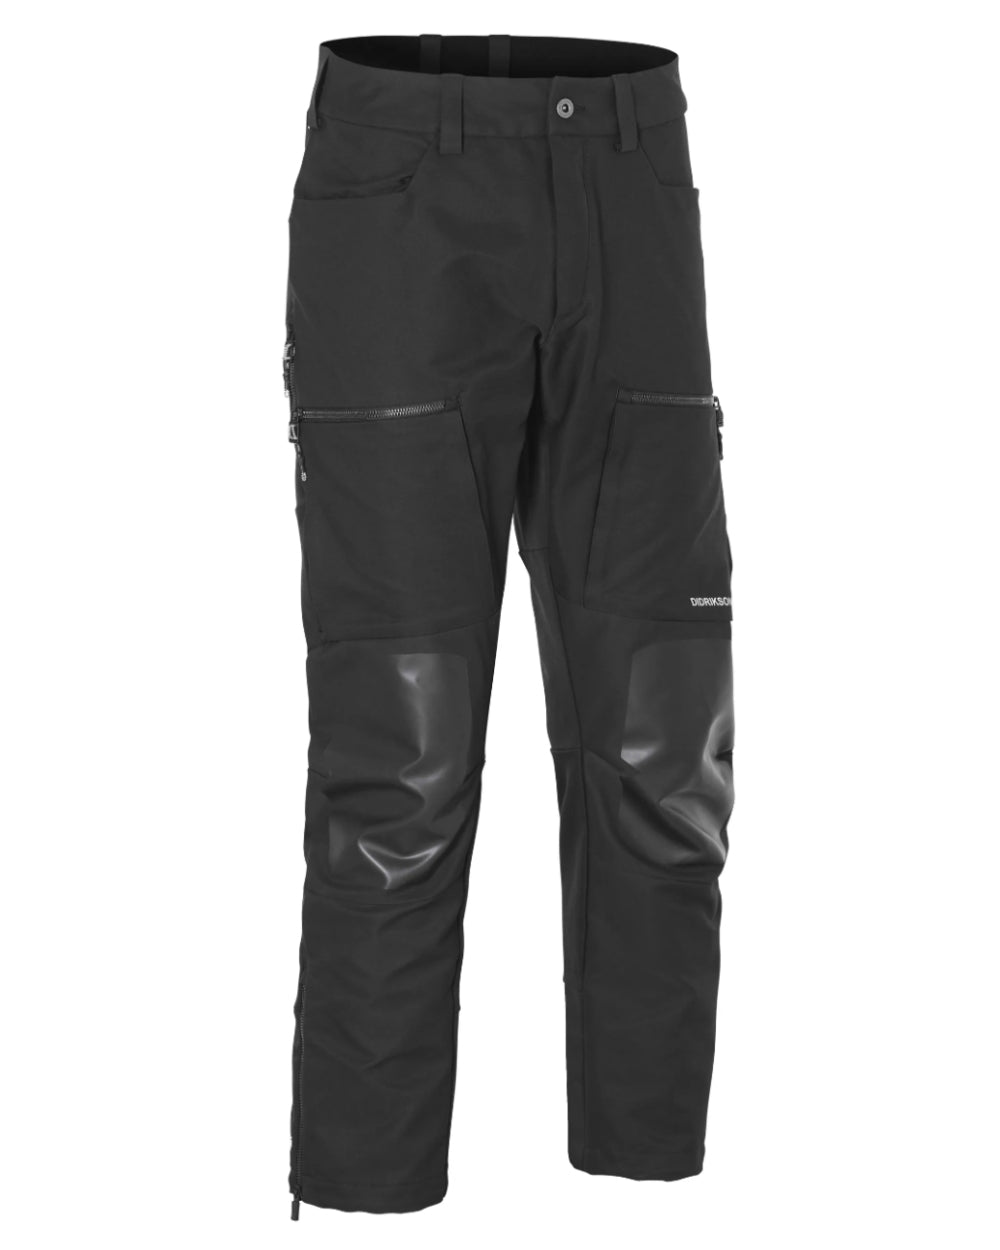 Black Coloured Didriksons Isac Pants On A White Background 